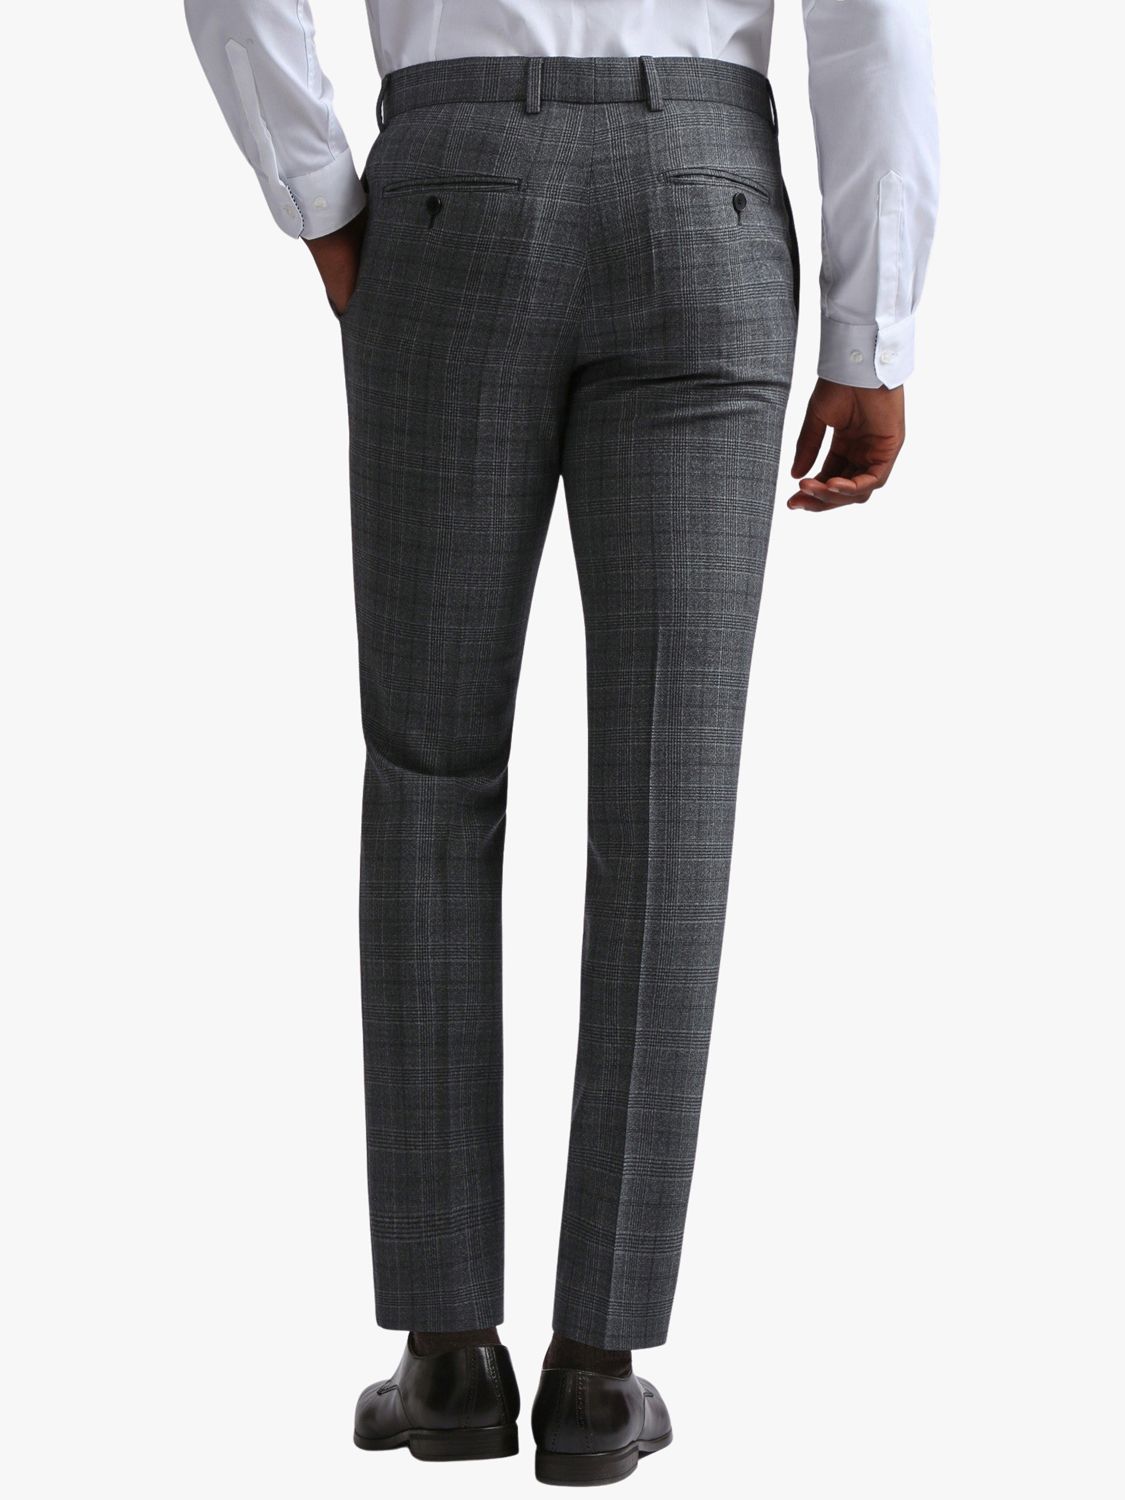 Ted Baker Zion Slim Fit Wool Trousers, Charcoal Check at John Lewis ...